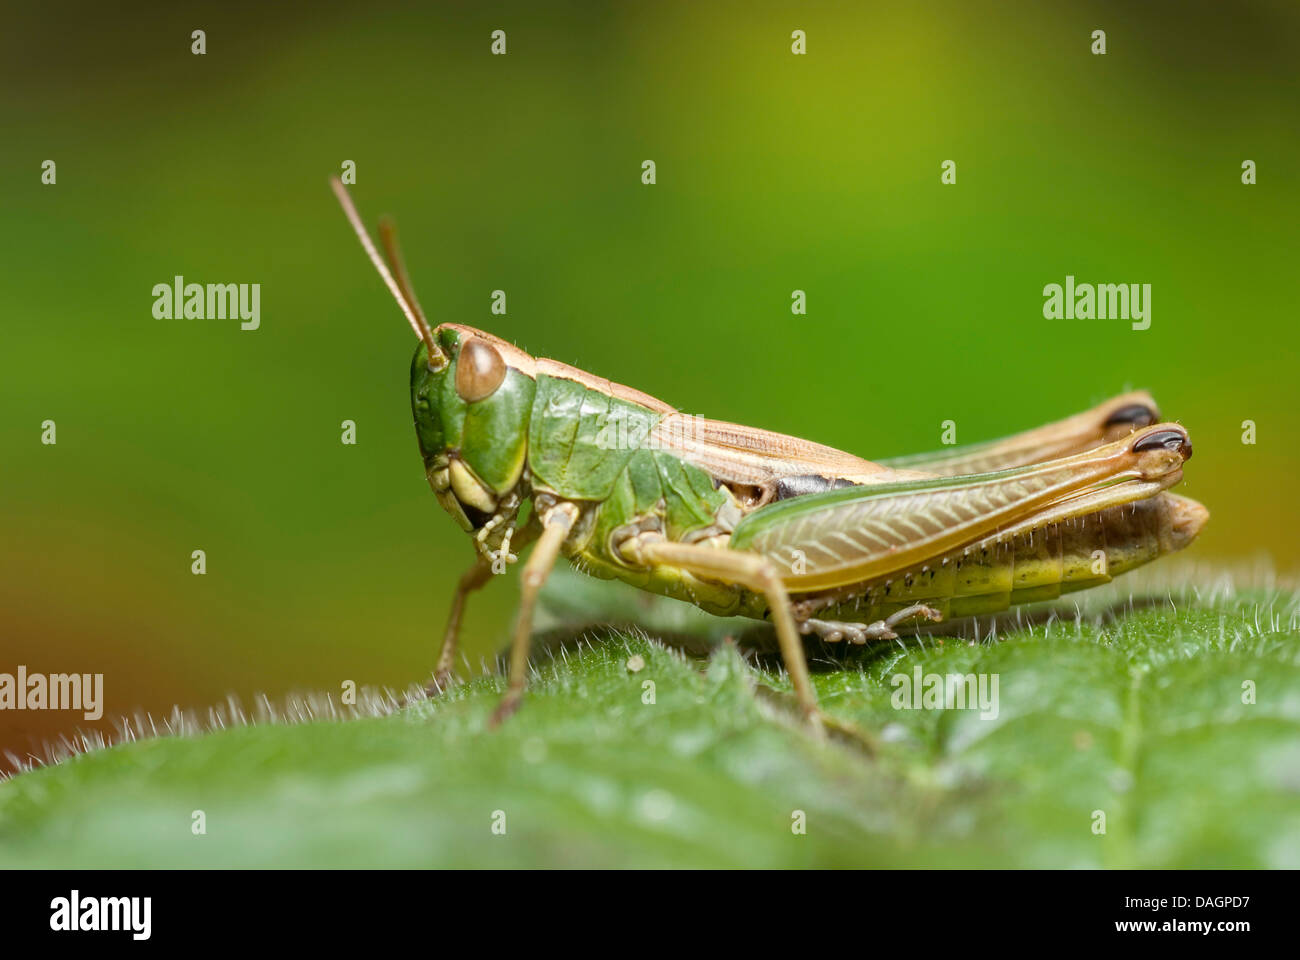 common meadow grasshopper (Chorthippus parallelus), sitting on a leaf, Germany Stock Photo